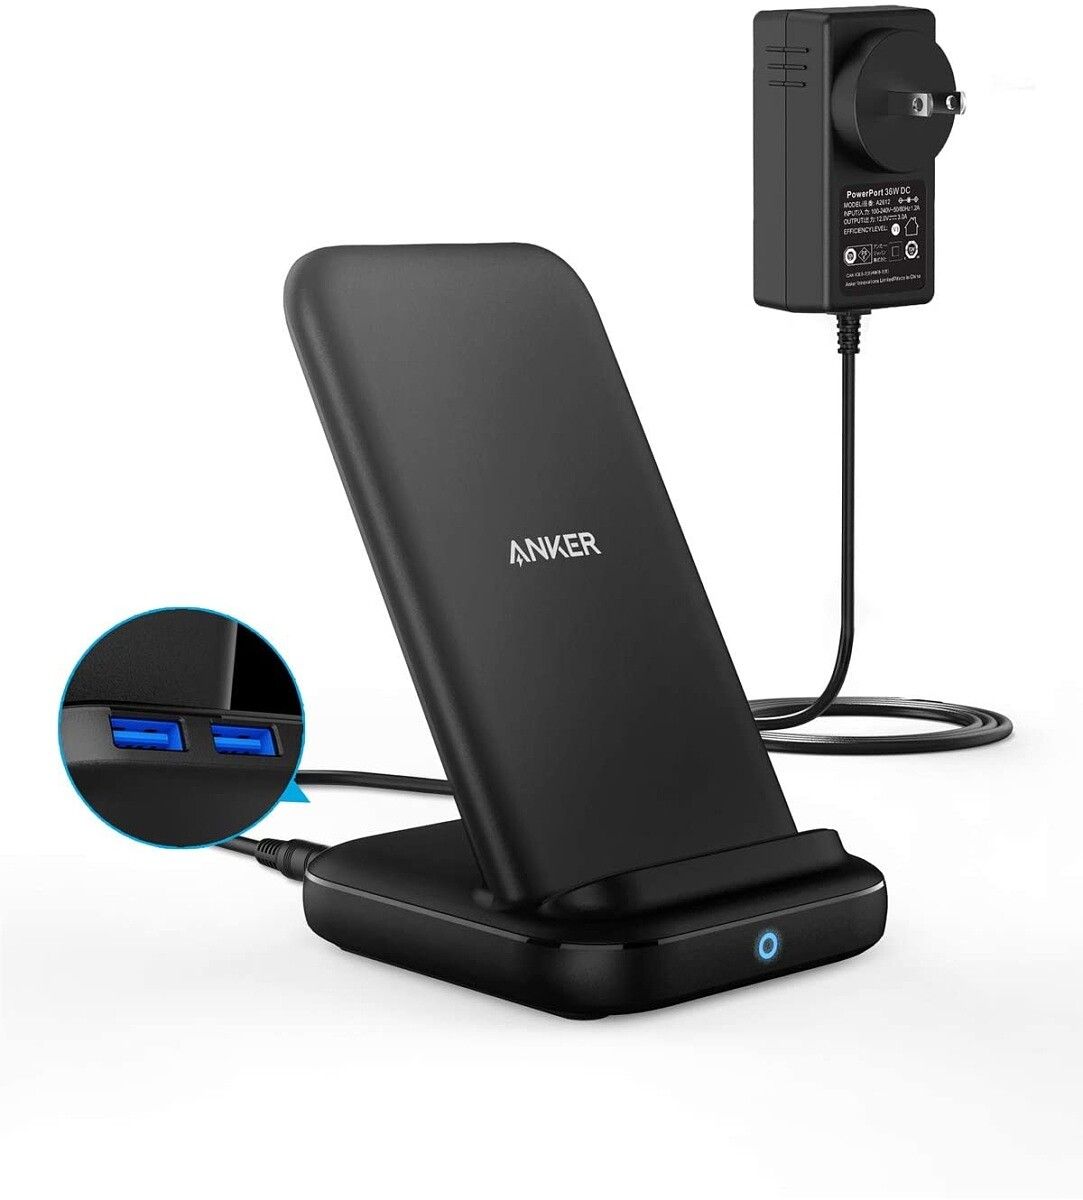 This is a 10W wireless charging stand with two USB Type-A ports on the back for charging other devices.